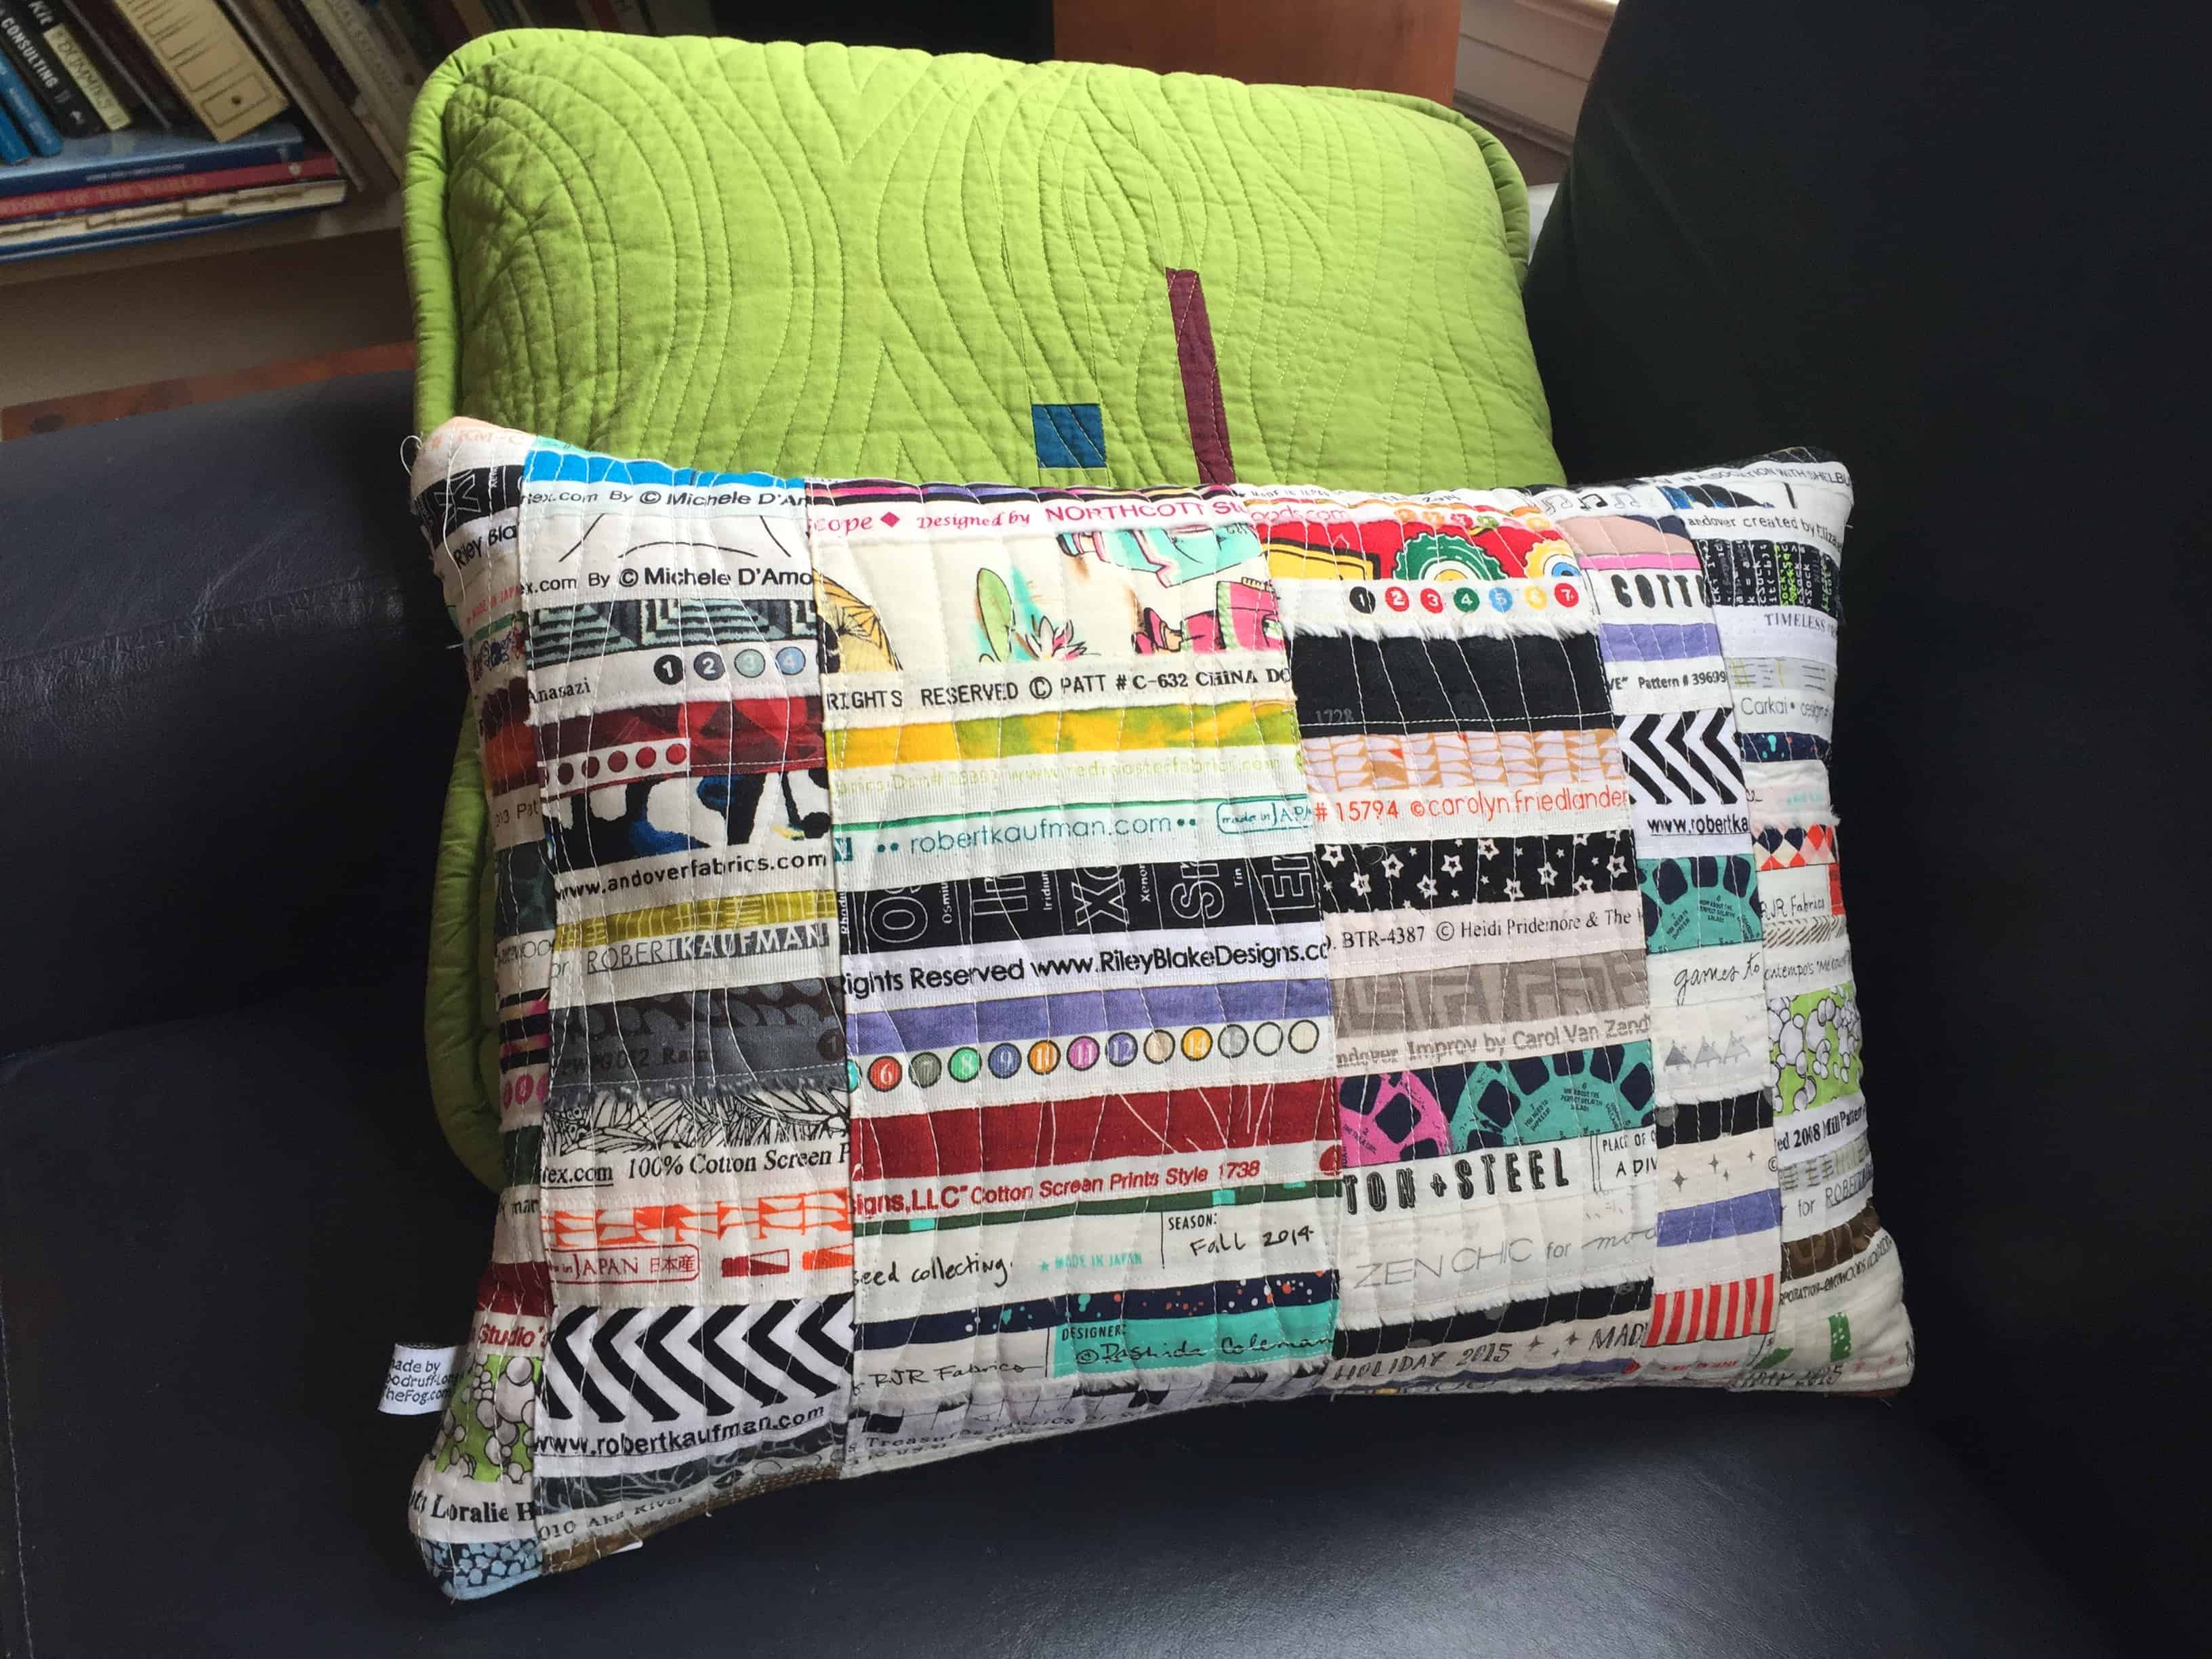 New covers for the living room pillows - using up those selvage scraps!